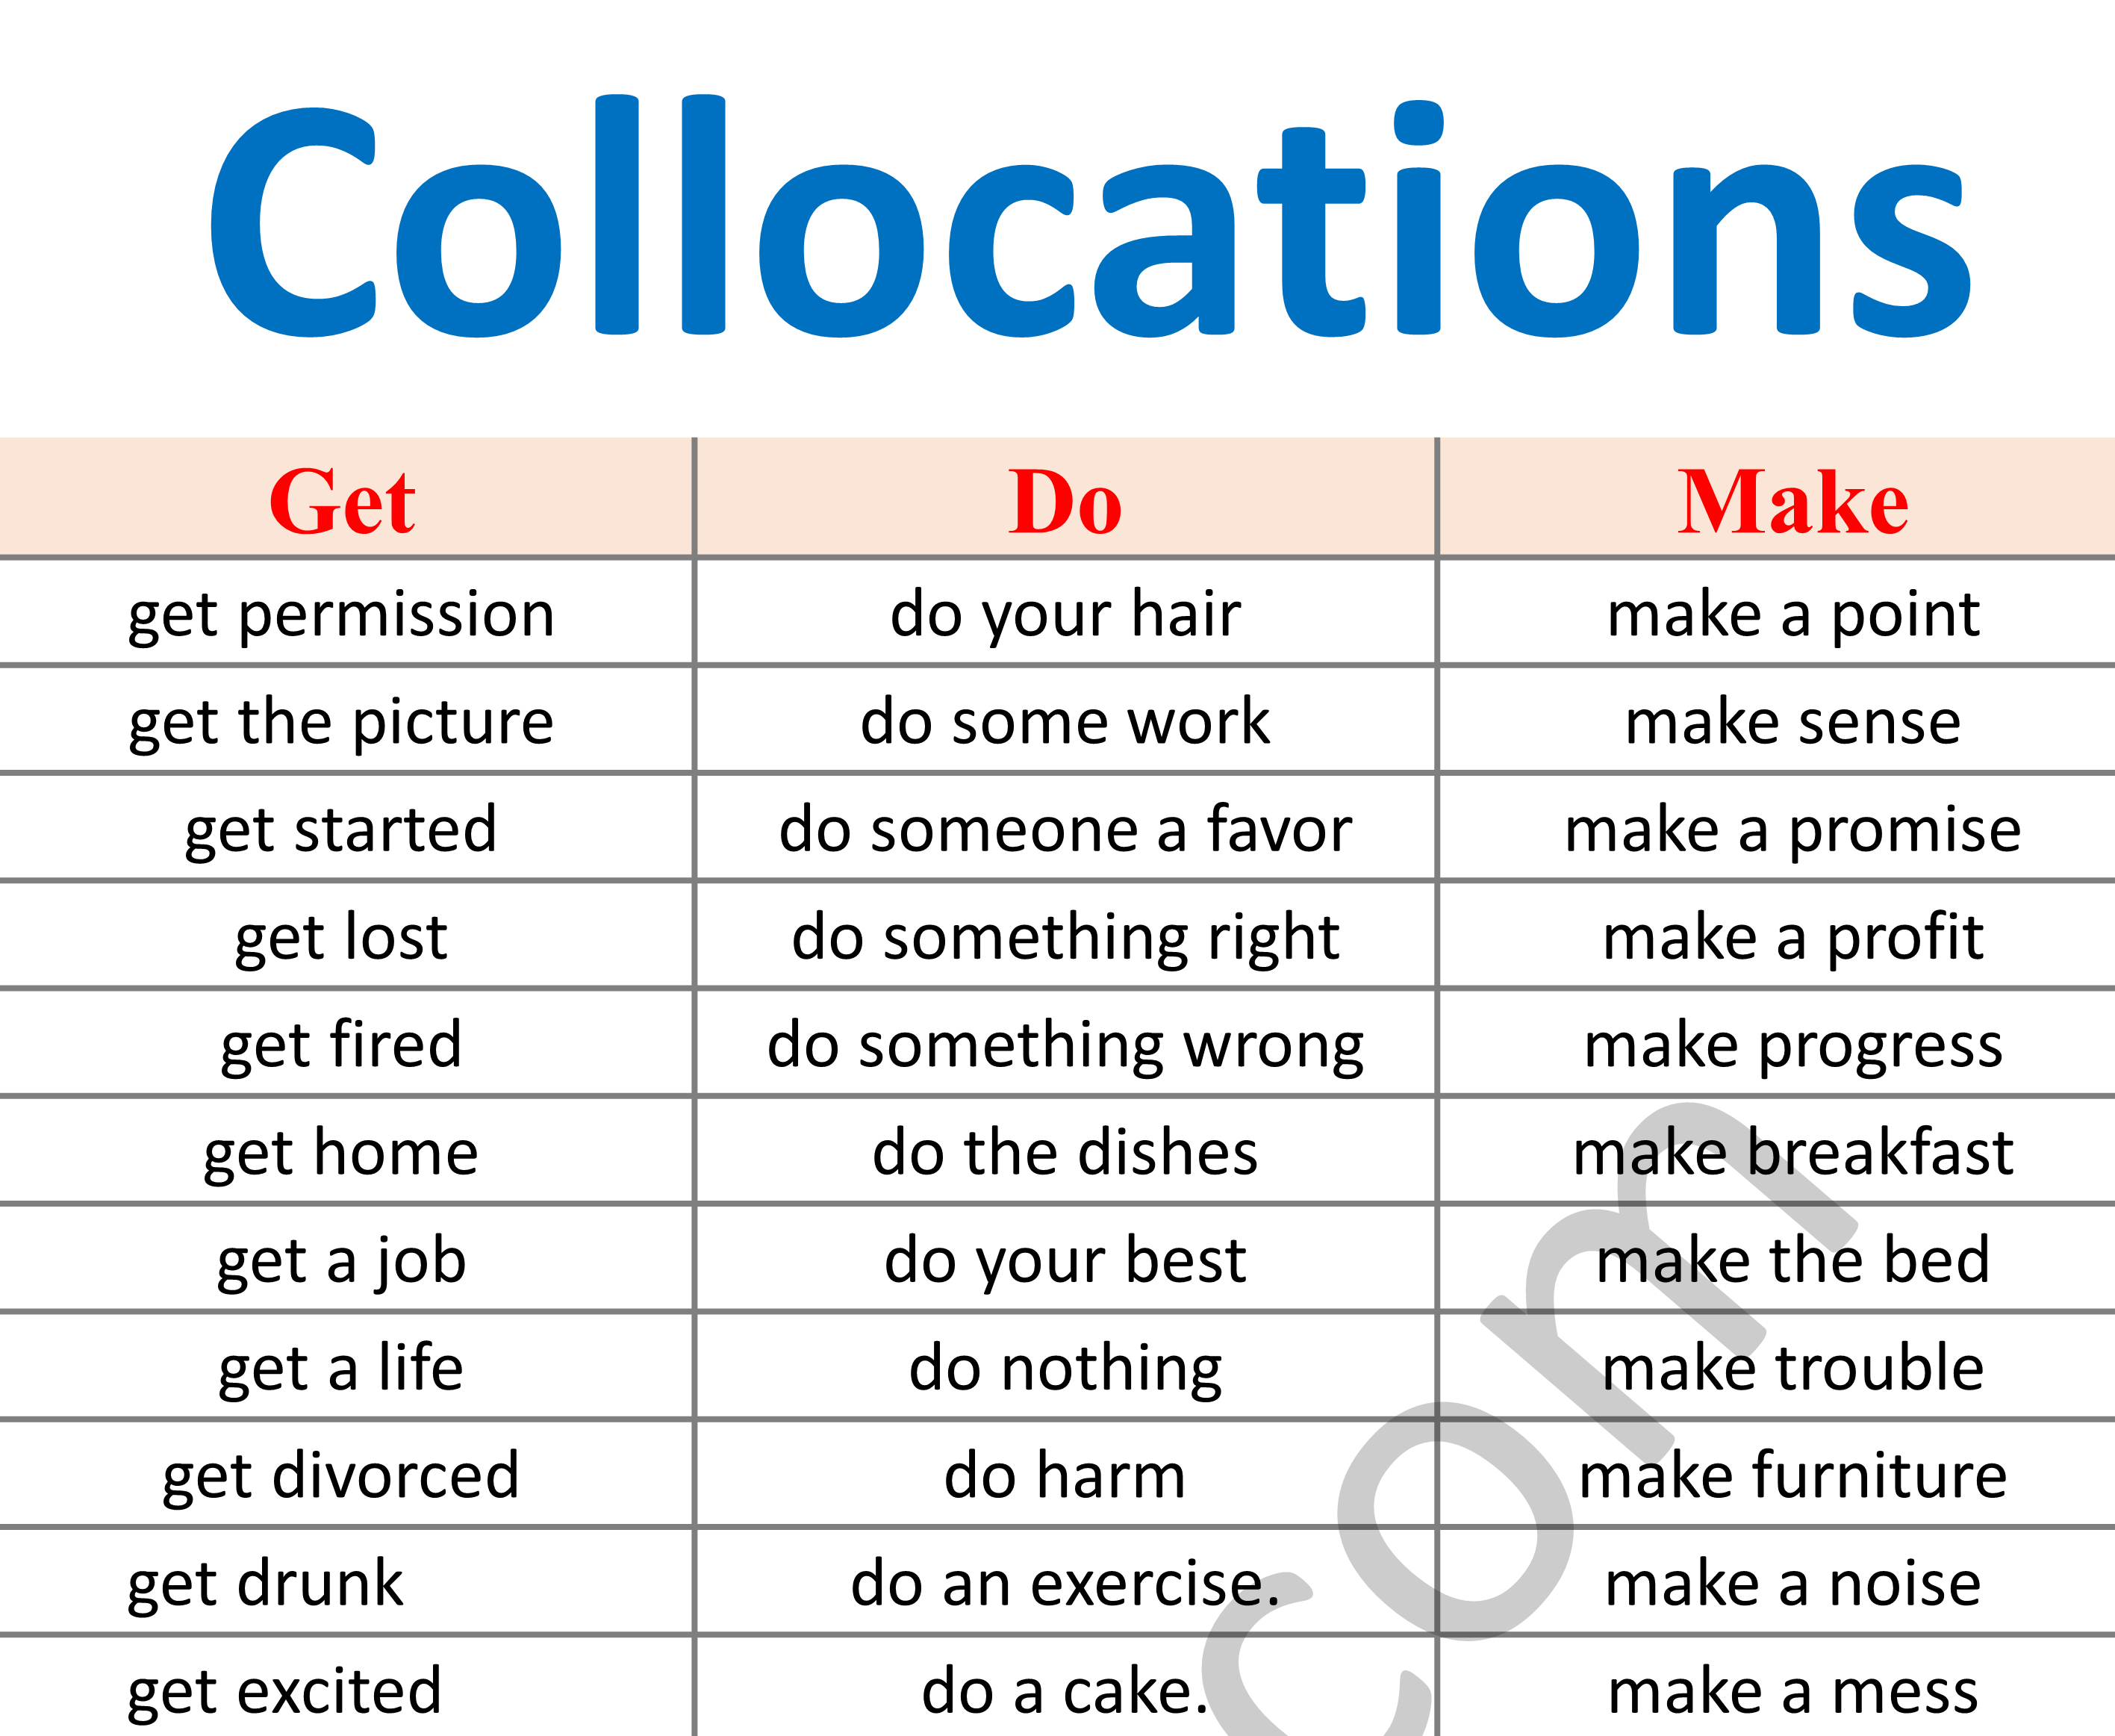 List of Collocations with Examples in English | ilmrary.com